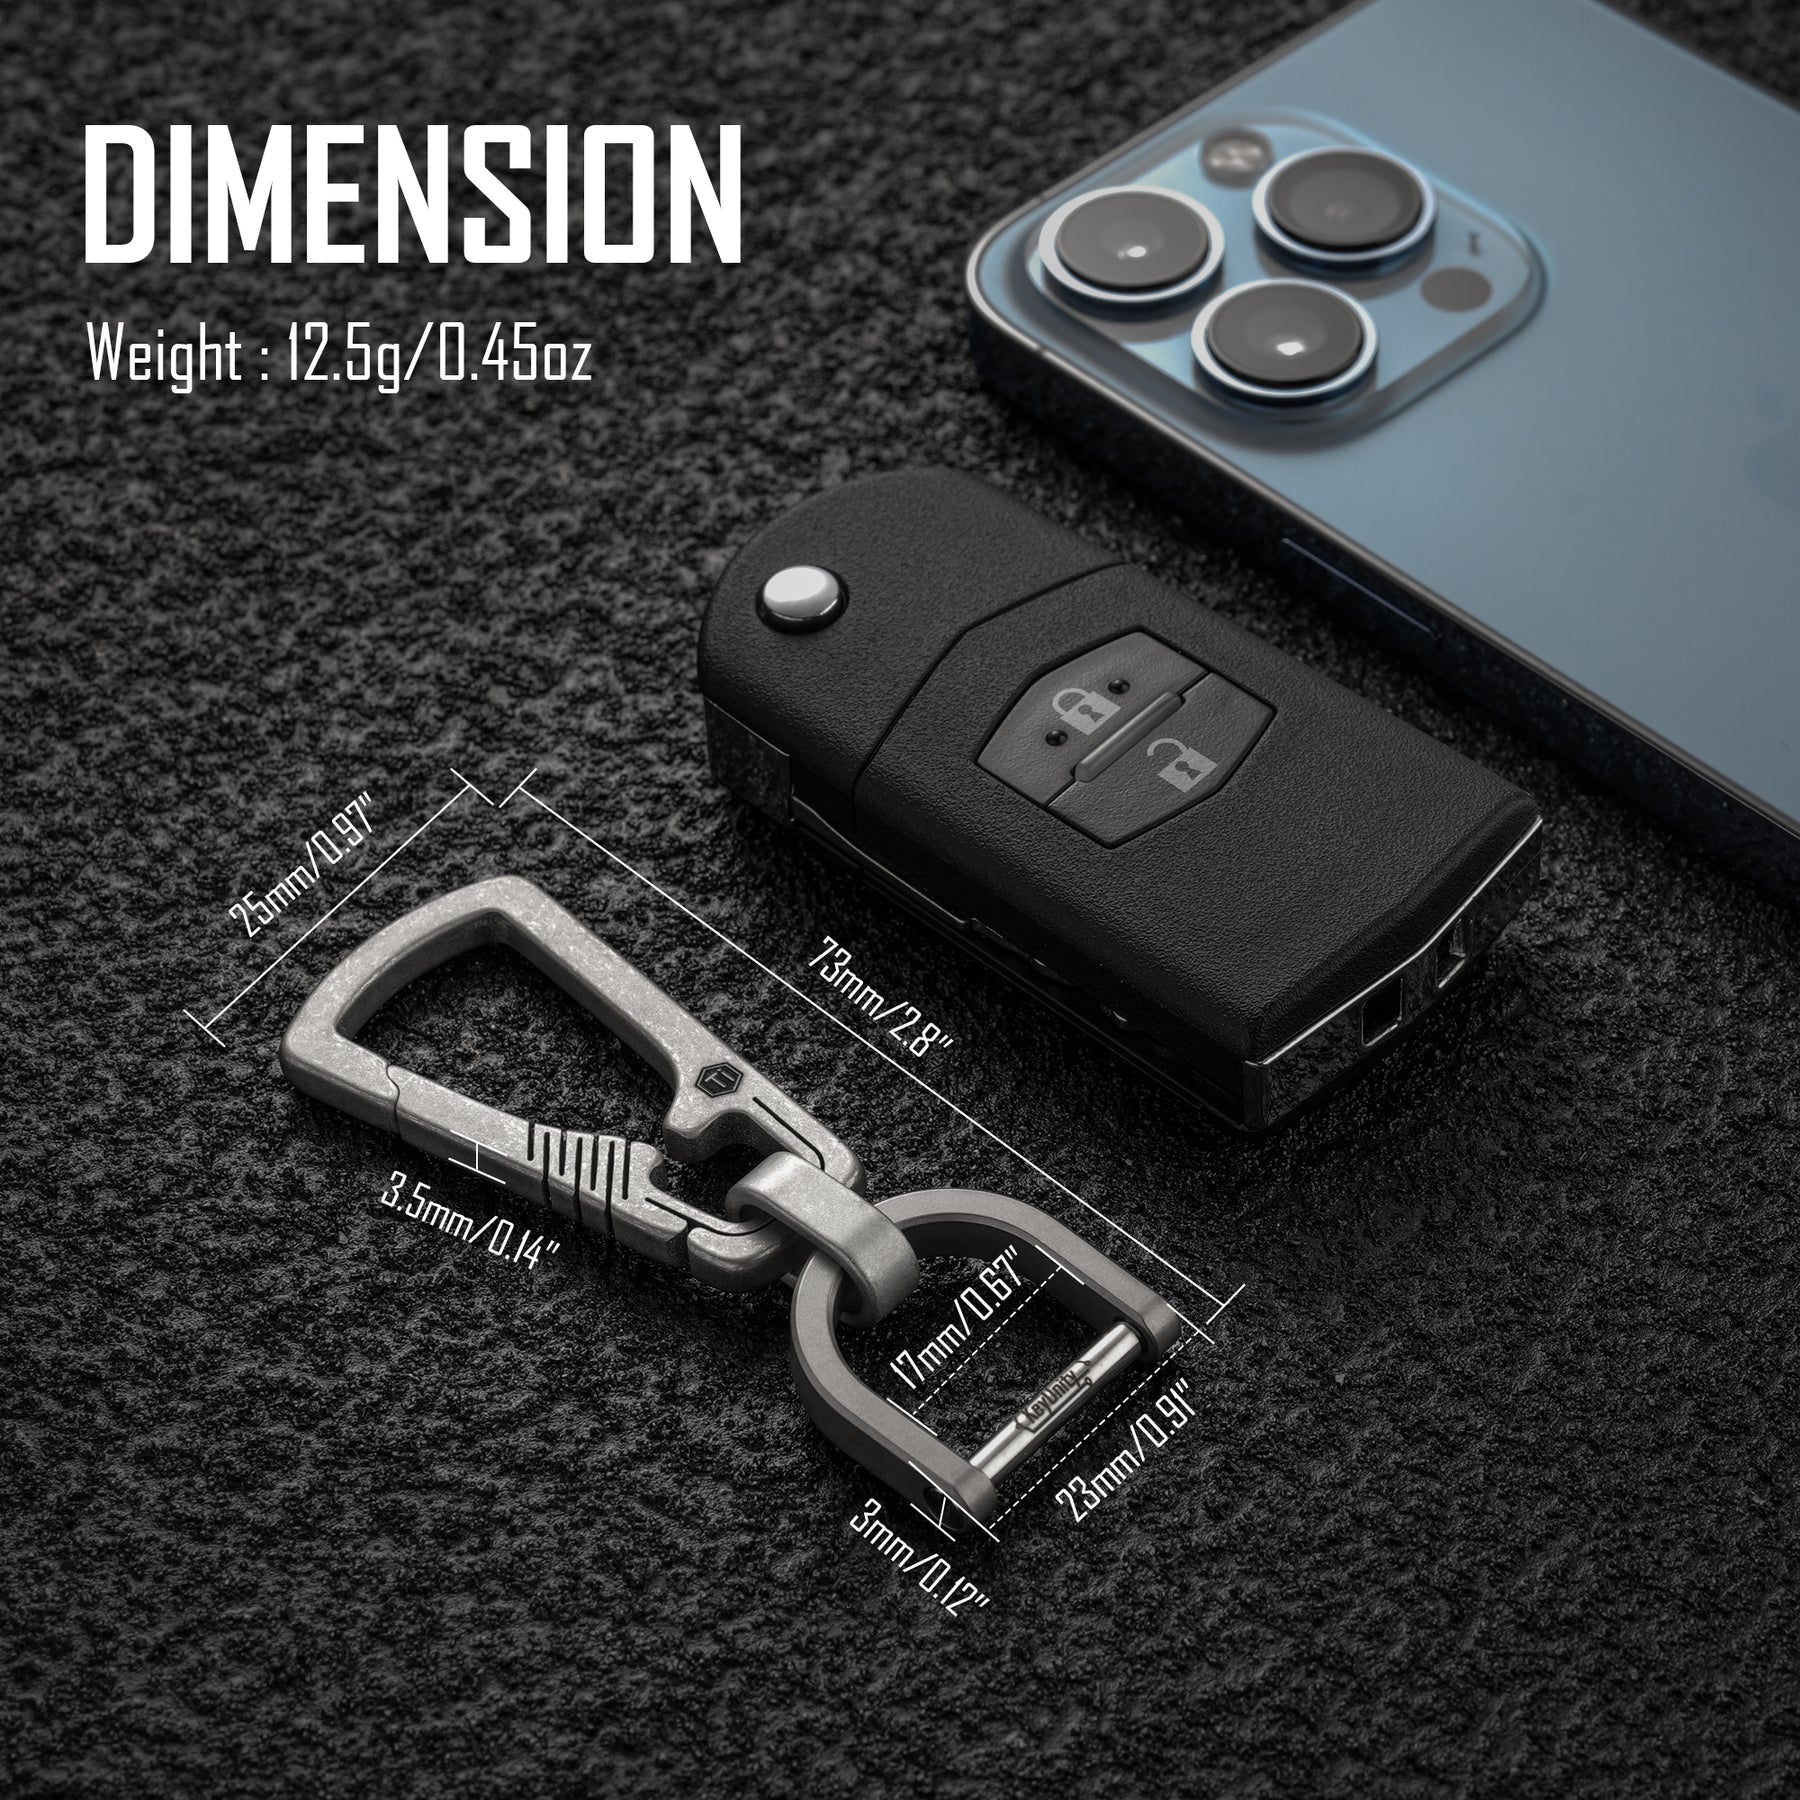 Mtverver Heavy Duty Key Chain with (1 key ring and 1 D-ring),Bottle  Opener,Carabiner Car Key Chains